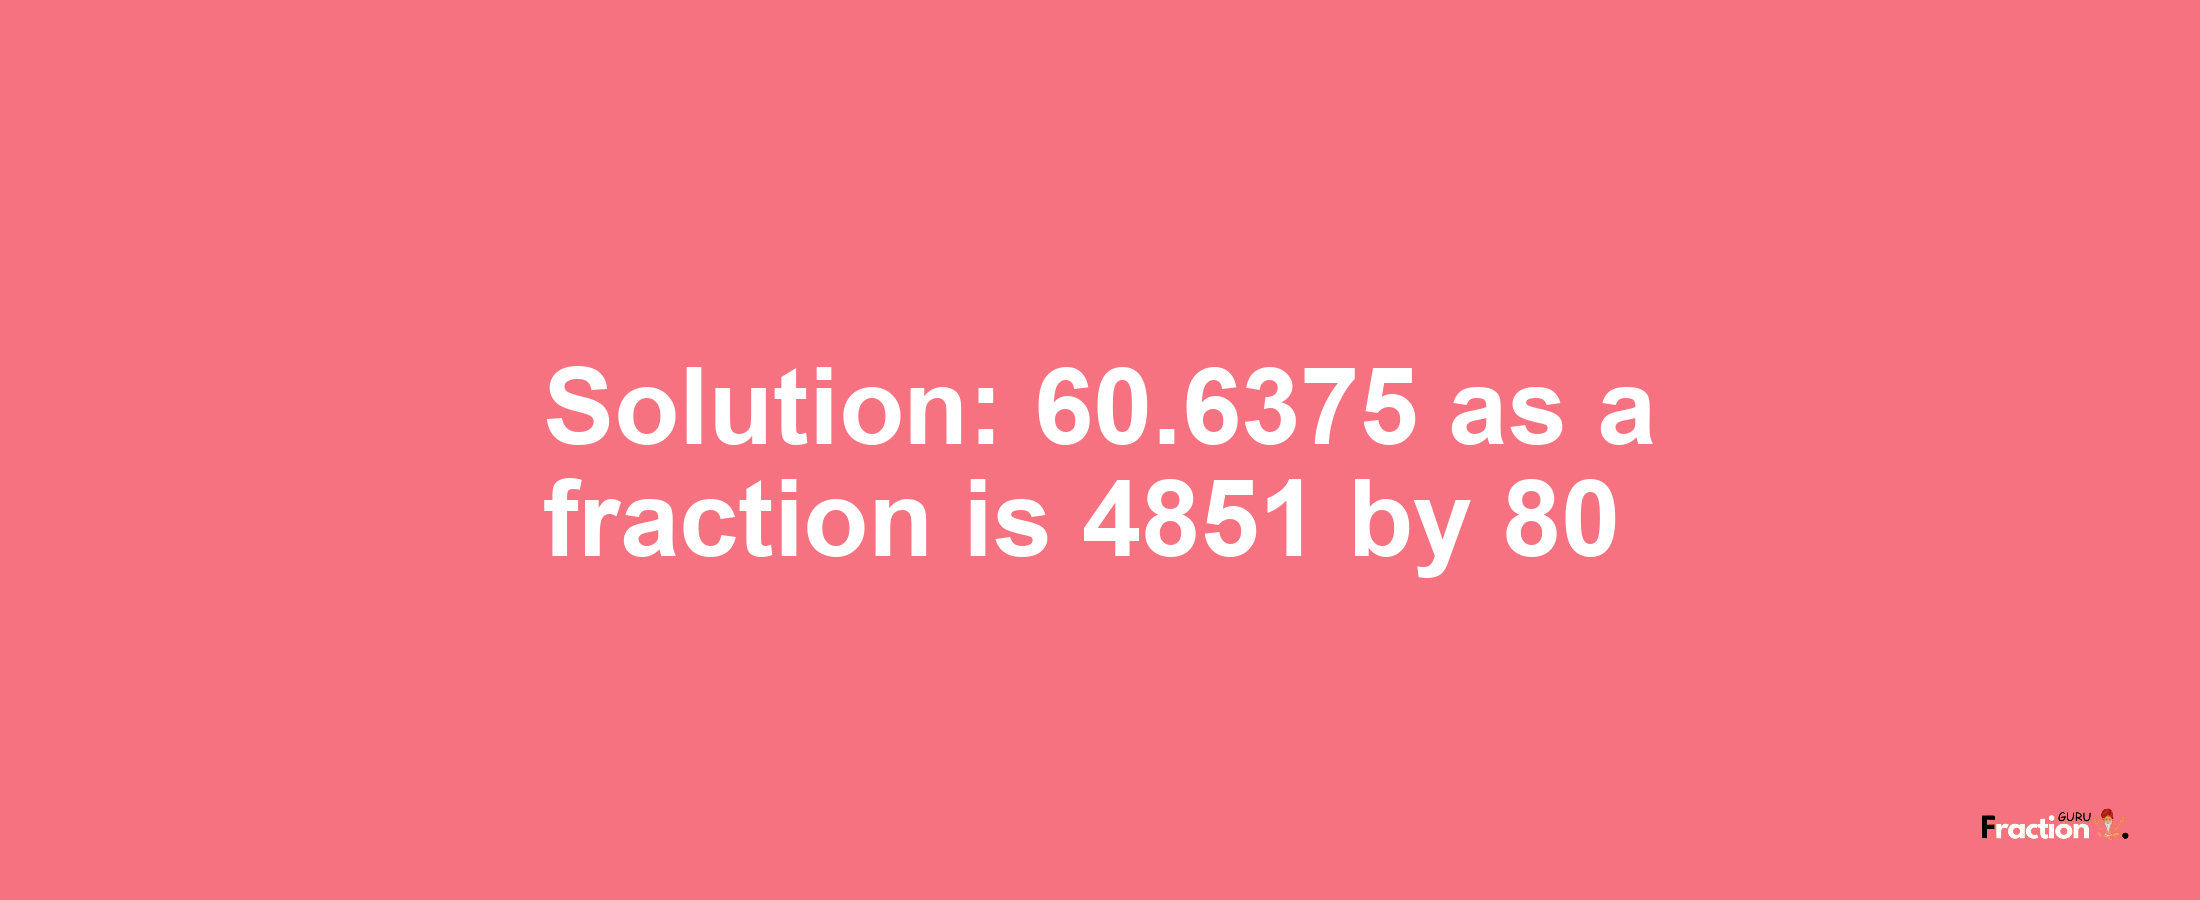 Solution:60.6375 as a fraction is 4851/80